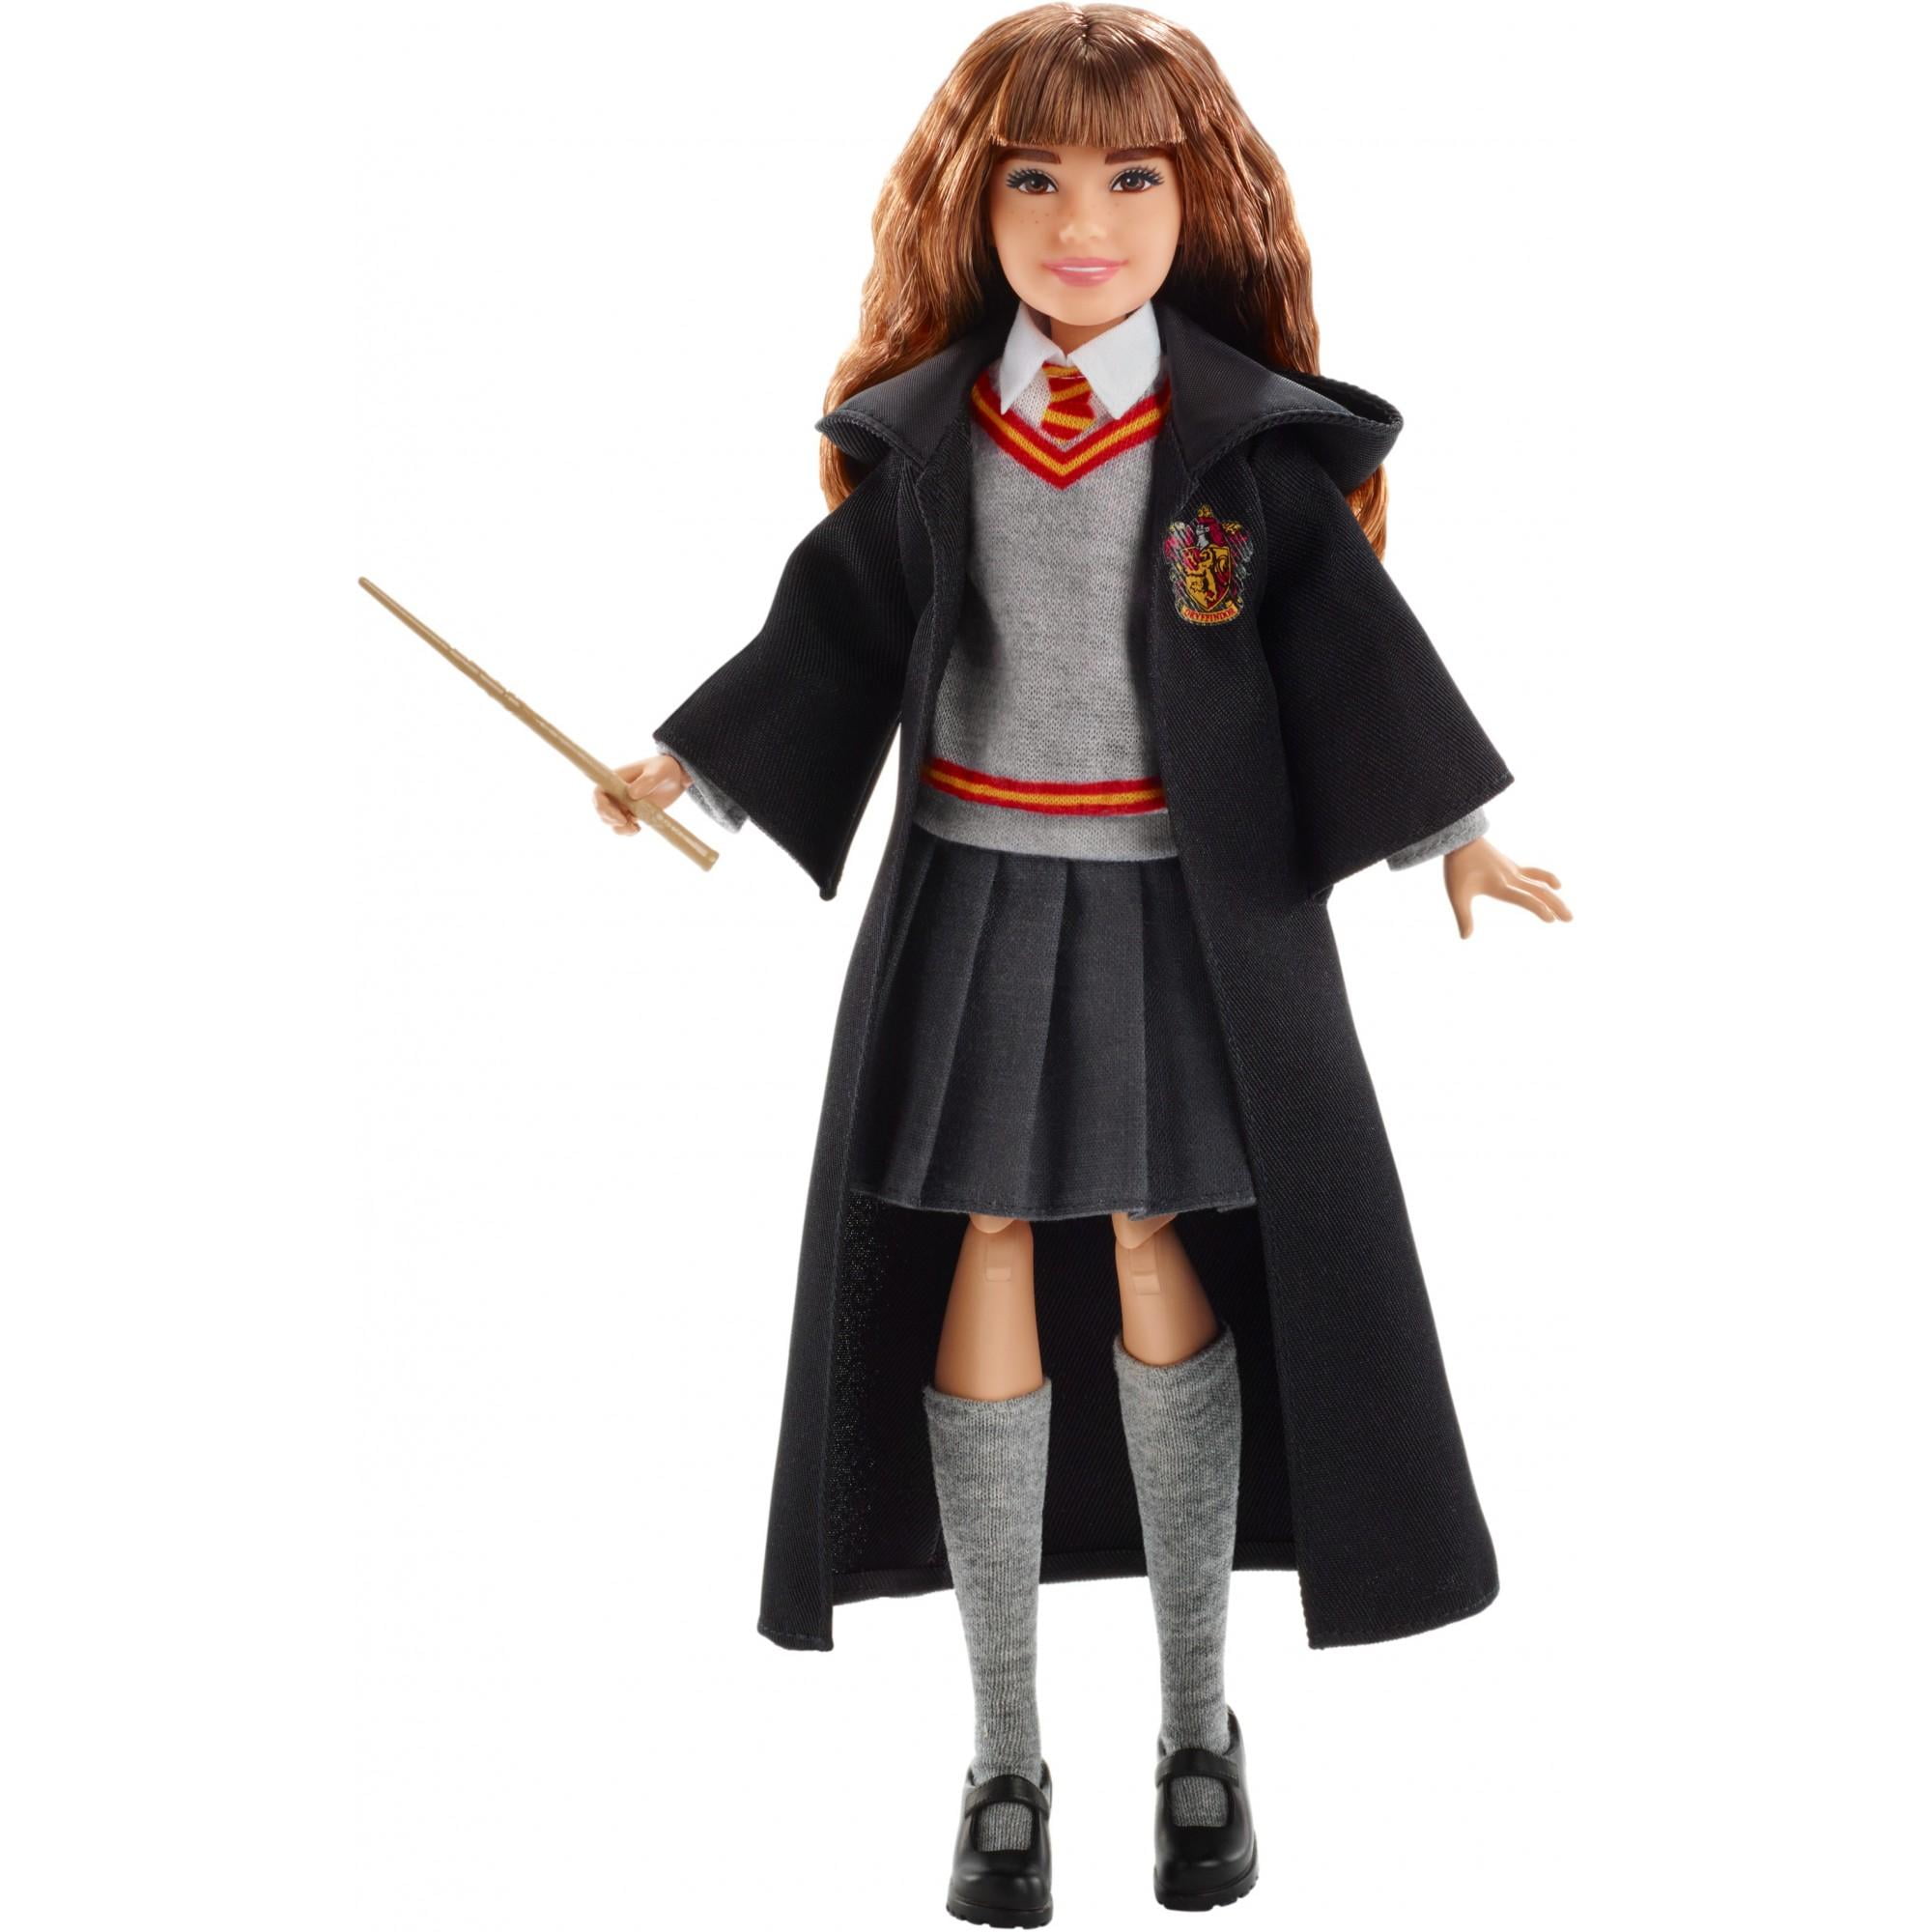 Custom AMERICAN GIRL SIZE Doll /& Child Matching Wands For Harry Potter Fans